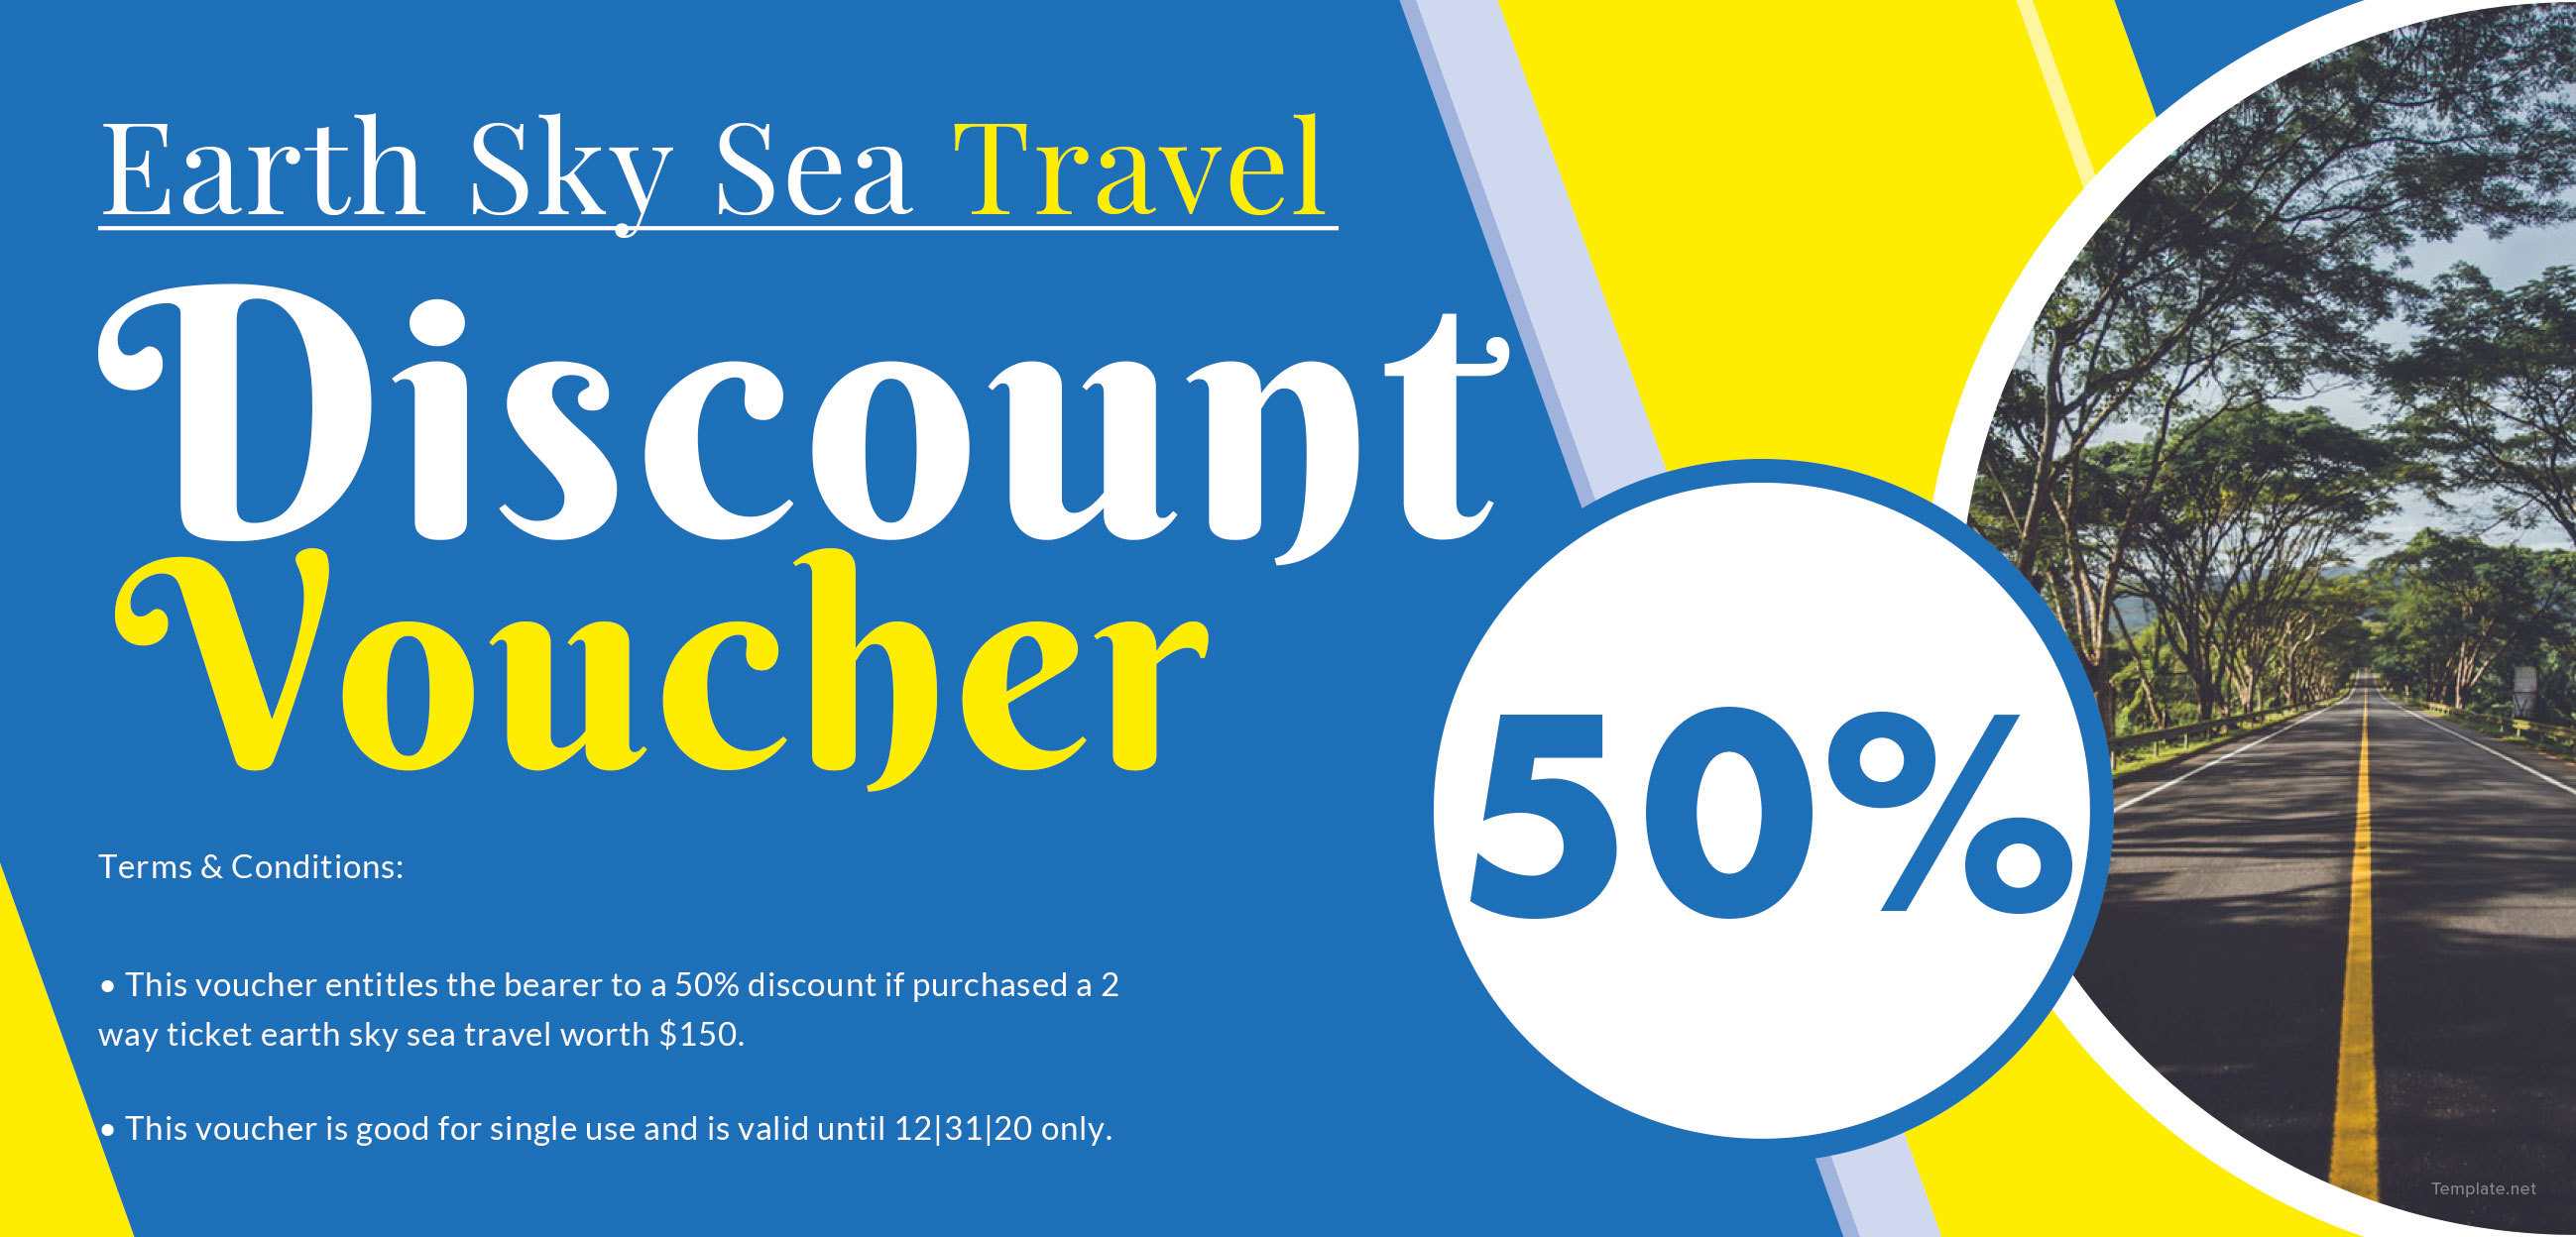 just travel discount code